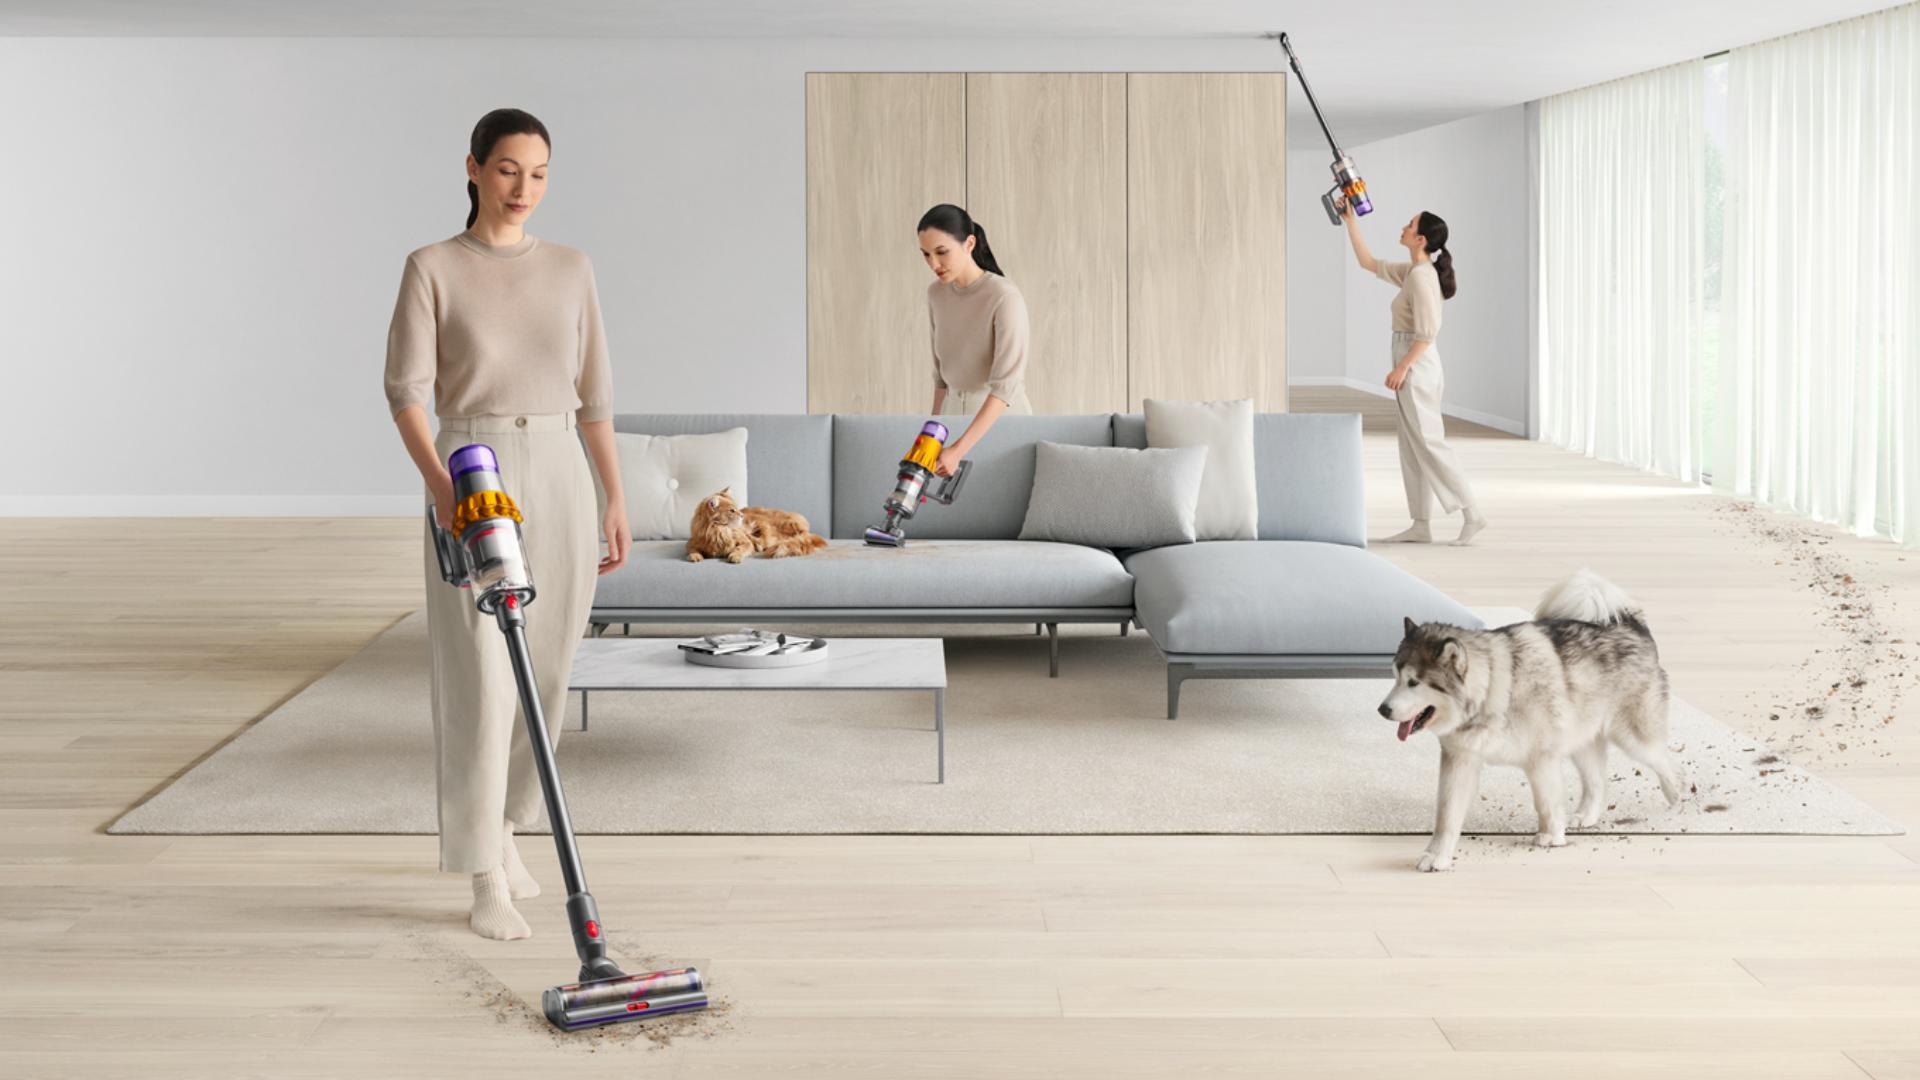 A person vacuuming after their pet in a living room area.